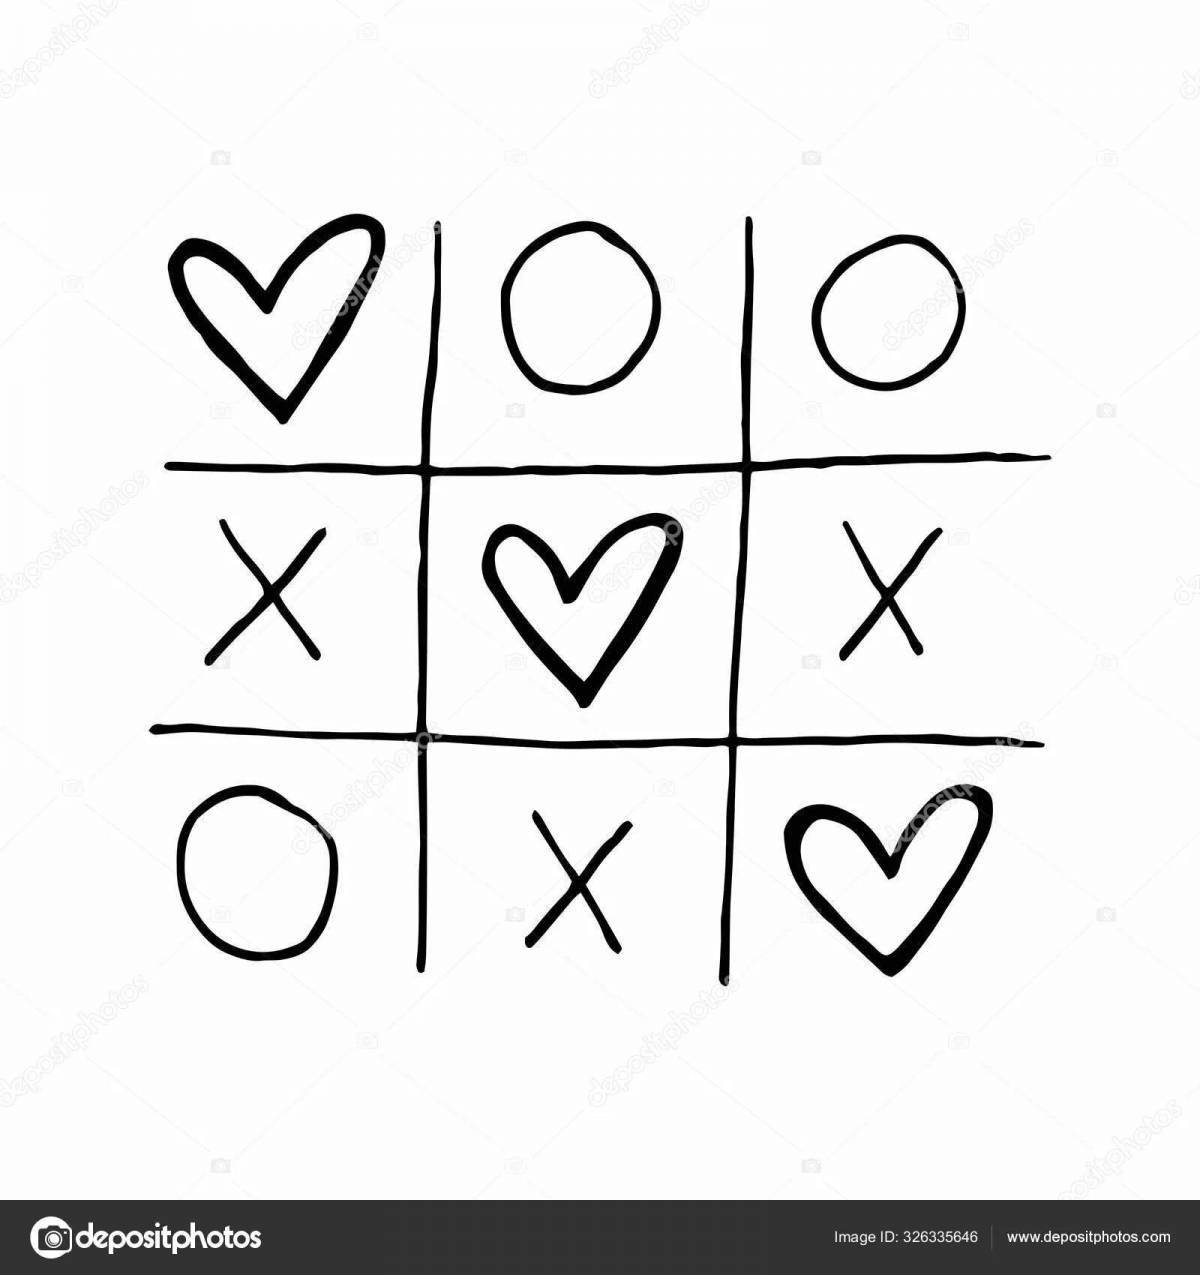 Tic-tac-toe coloring page